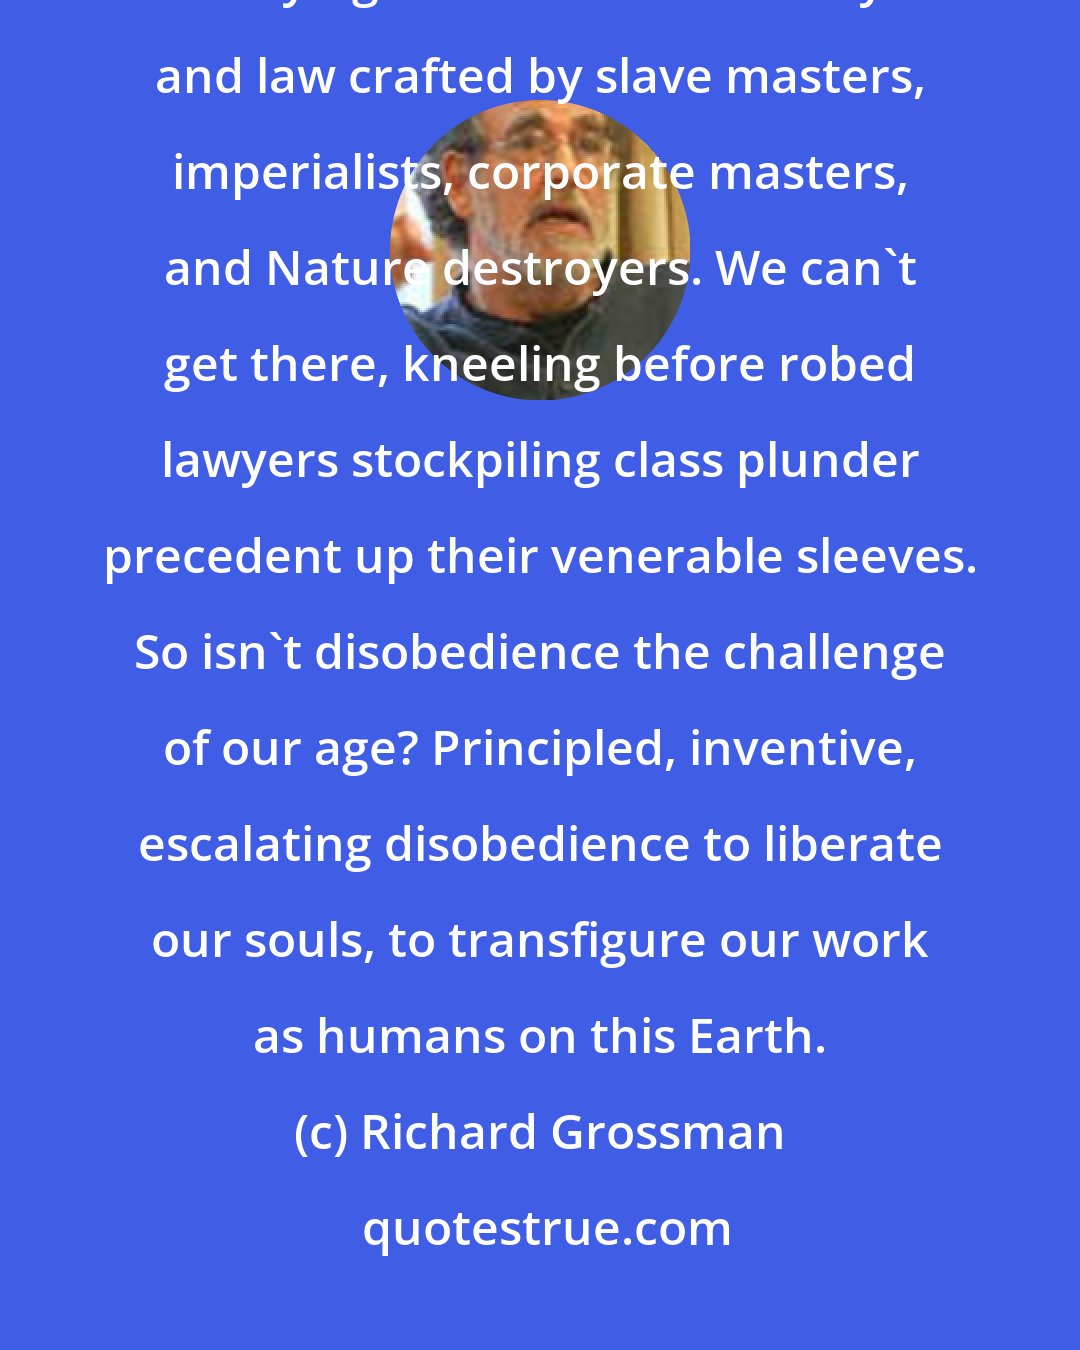 Richard Grossman: You want sanity, democracy, community, an intact Earth? We can't get there, obeying Constitutional theory and law crafted by slave masters, imperialists, corporate masters, and Nature destroyers. We can't get there, kneeling before robed lawyers stockpiling class plunder precedent up their venerable sleeves. So isn't disobedience the challenge of our age? Principled, inventive, escalating disobedience to liberate our souls, to transfigure our work as humans on this Earth.